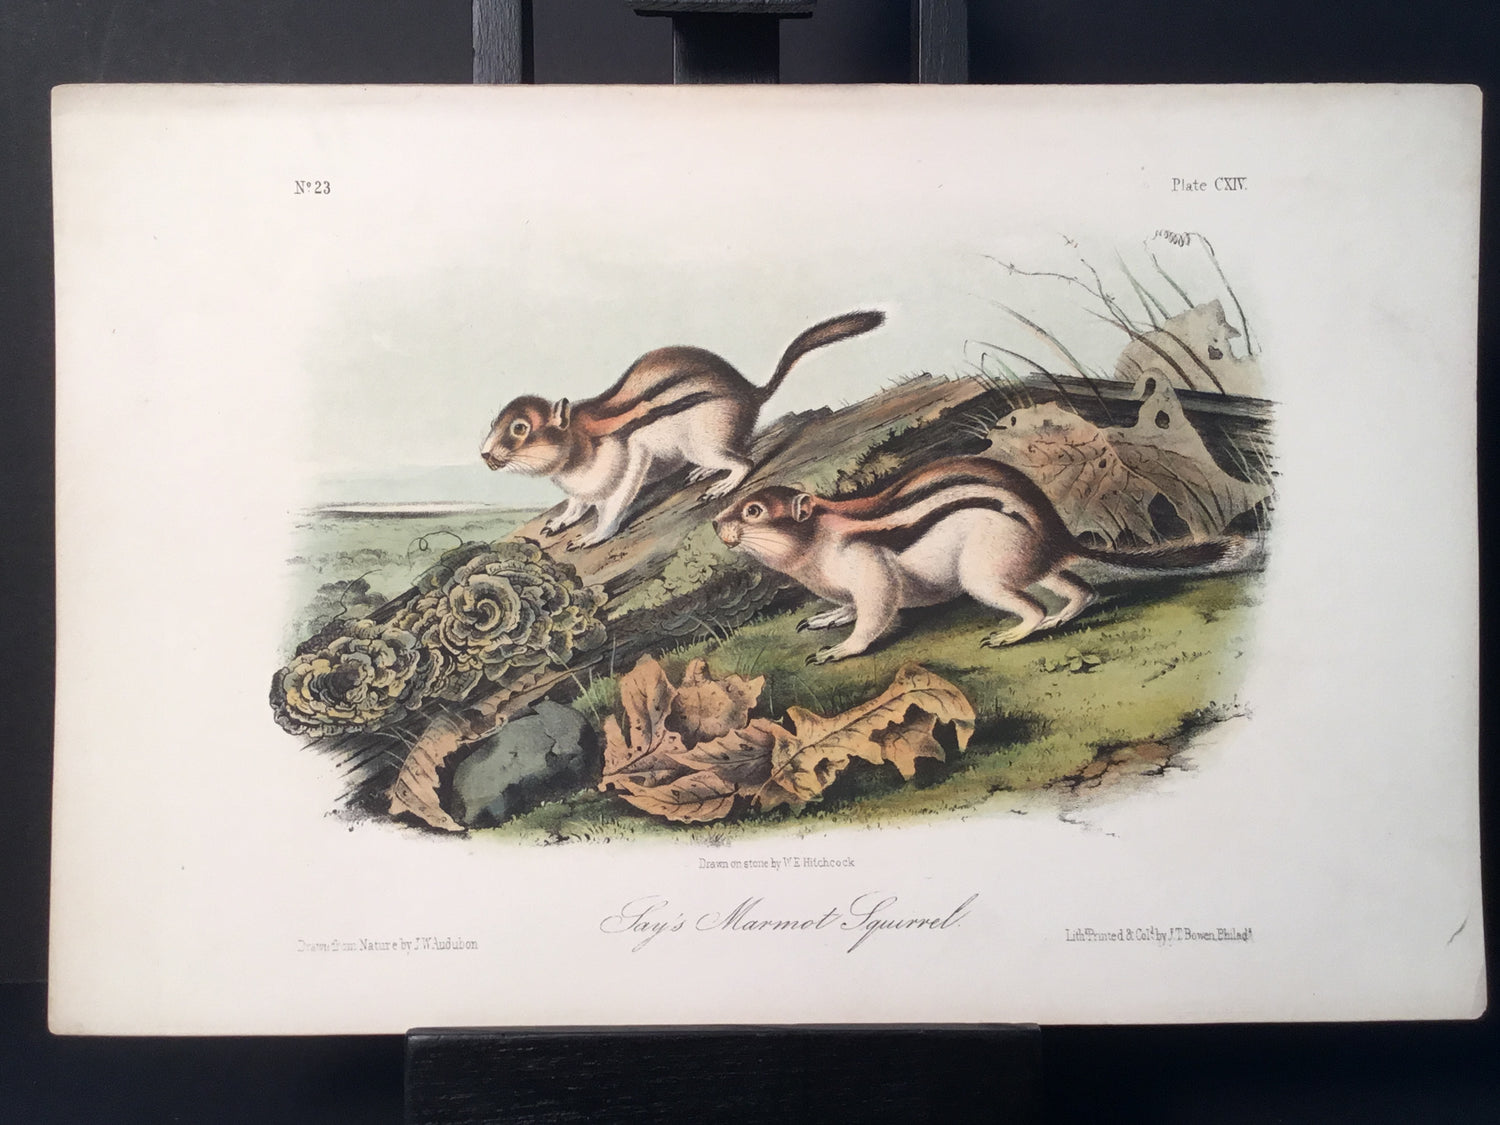 Lord-Hopkins Collection - Say’s Marmot Squirrel